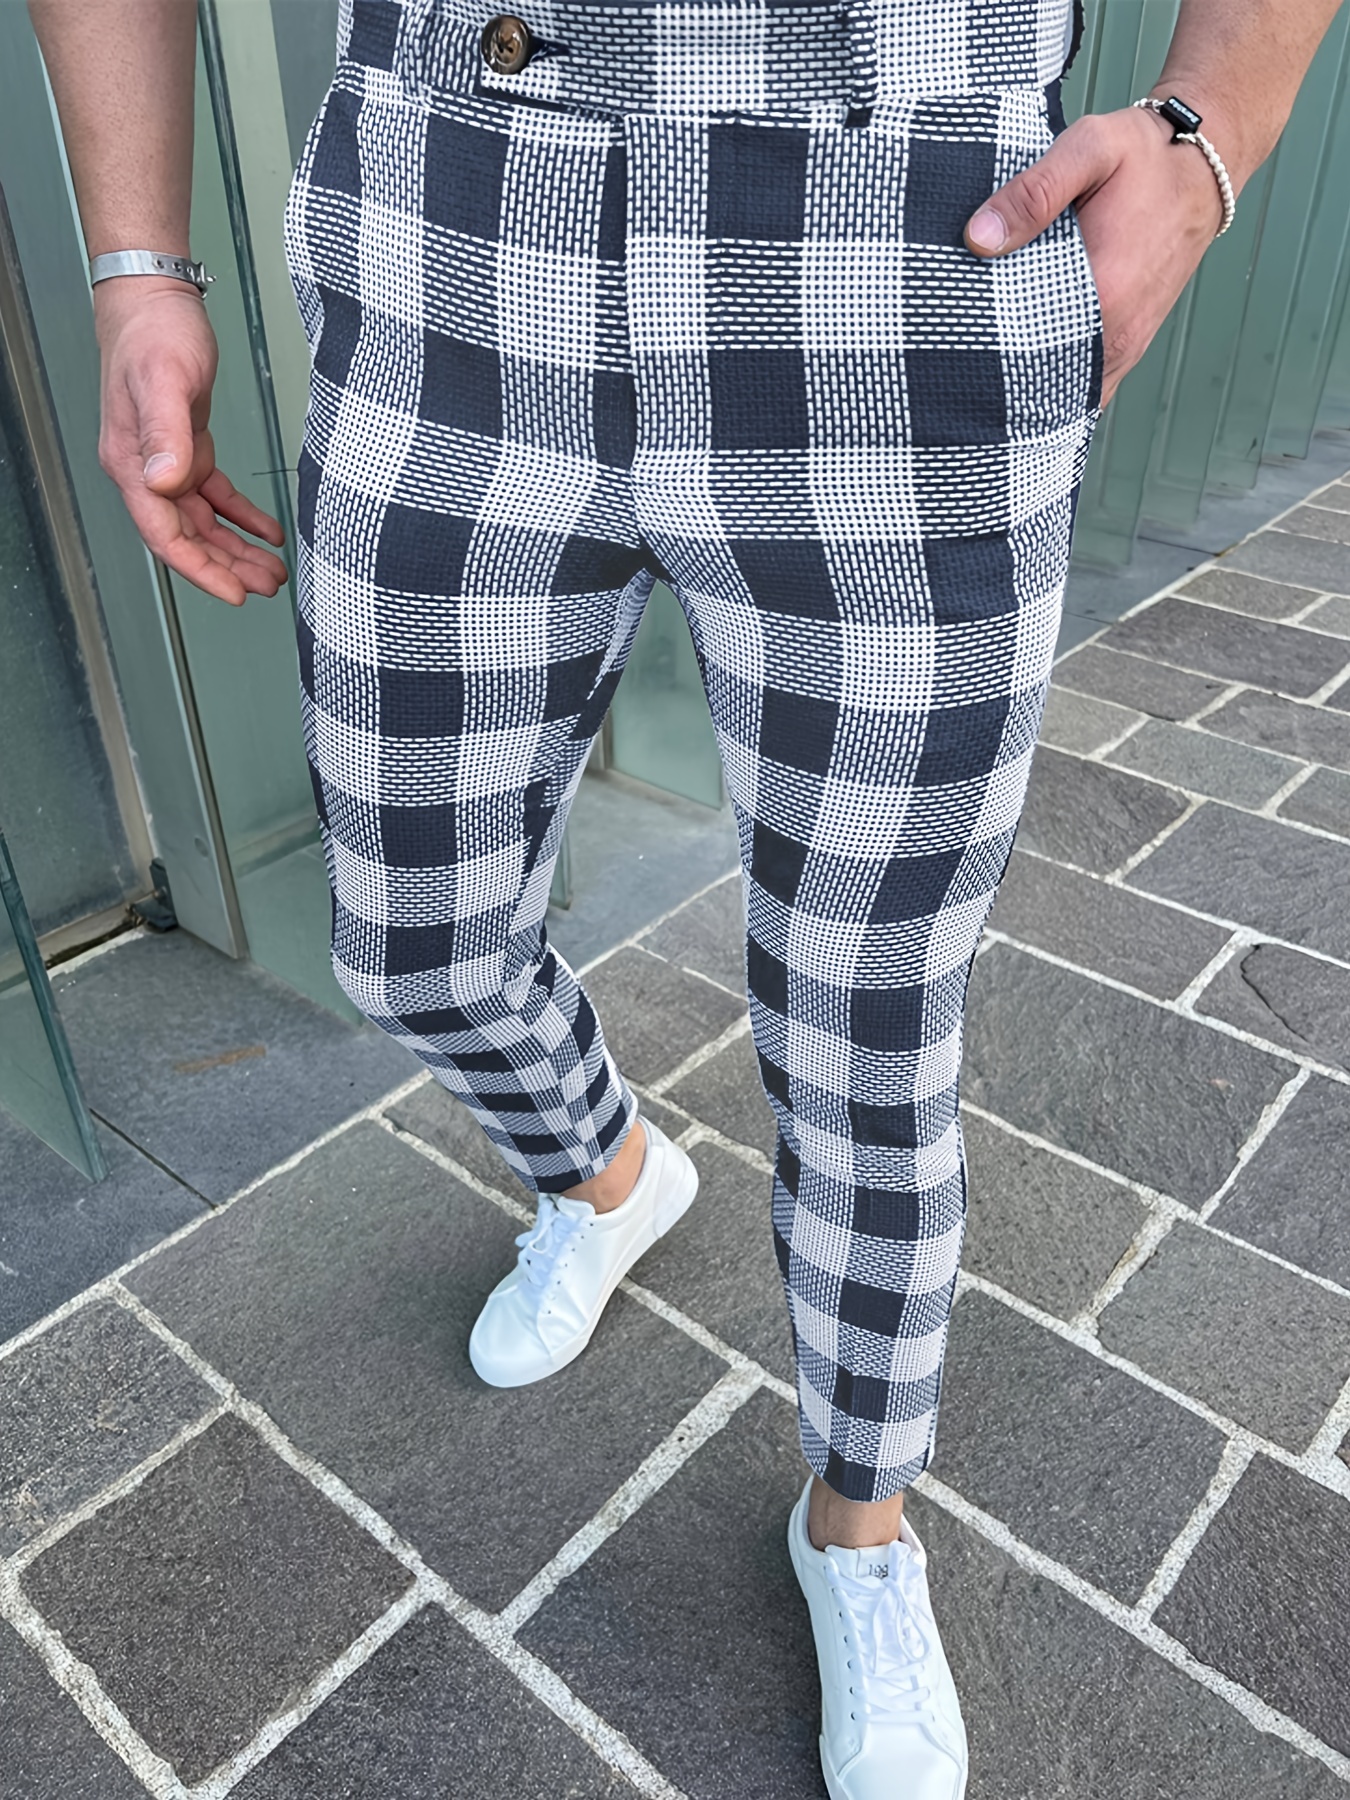 Charcoal Check Casual Trouser  CANOE TRENDS